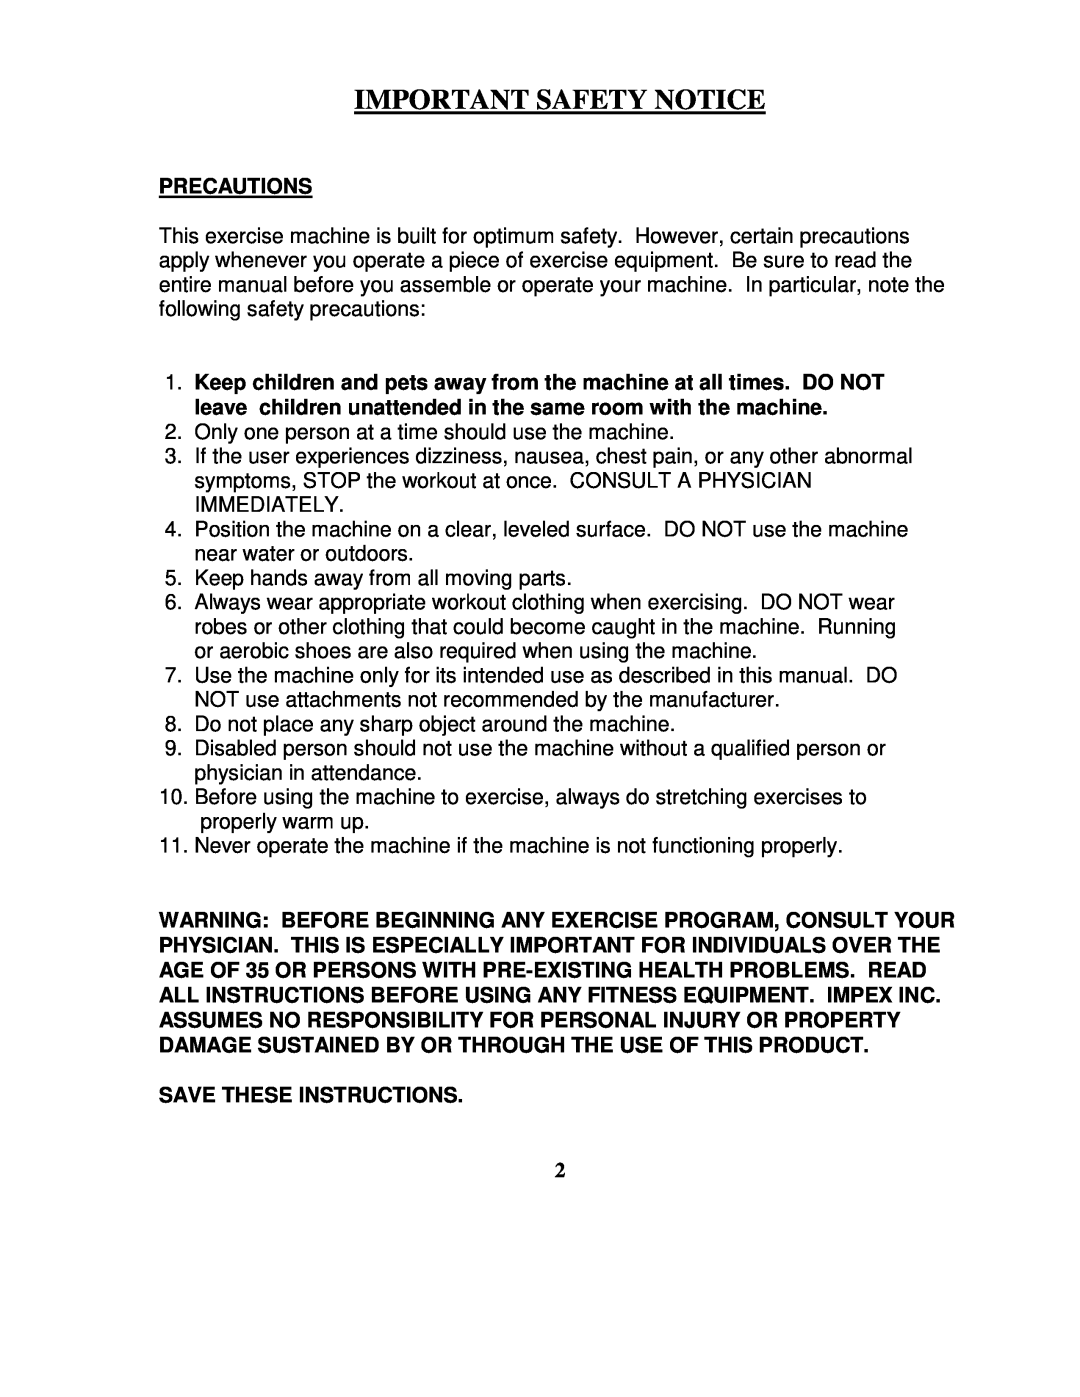 Impex IGS-10 manual Important Safety Notice, Precautions, Save These Instructions 